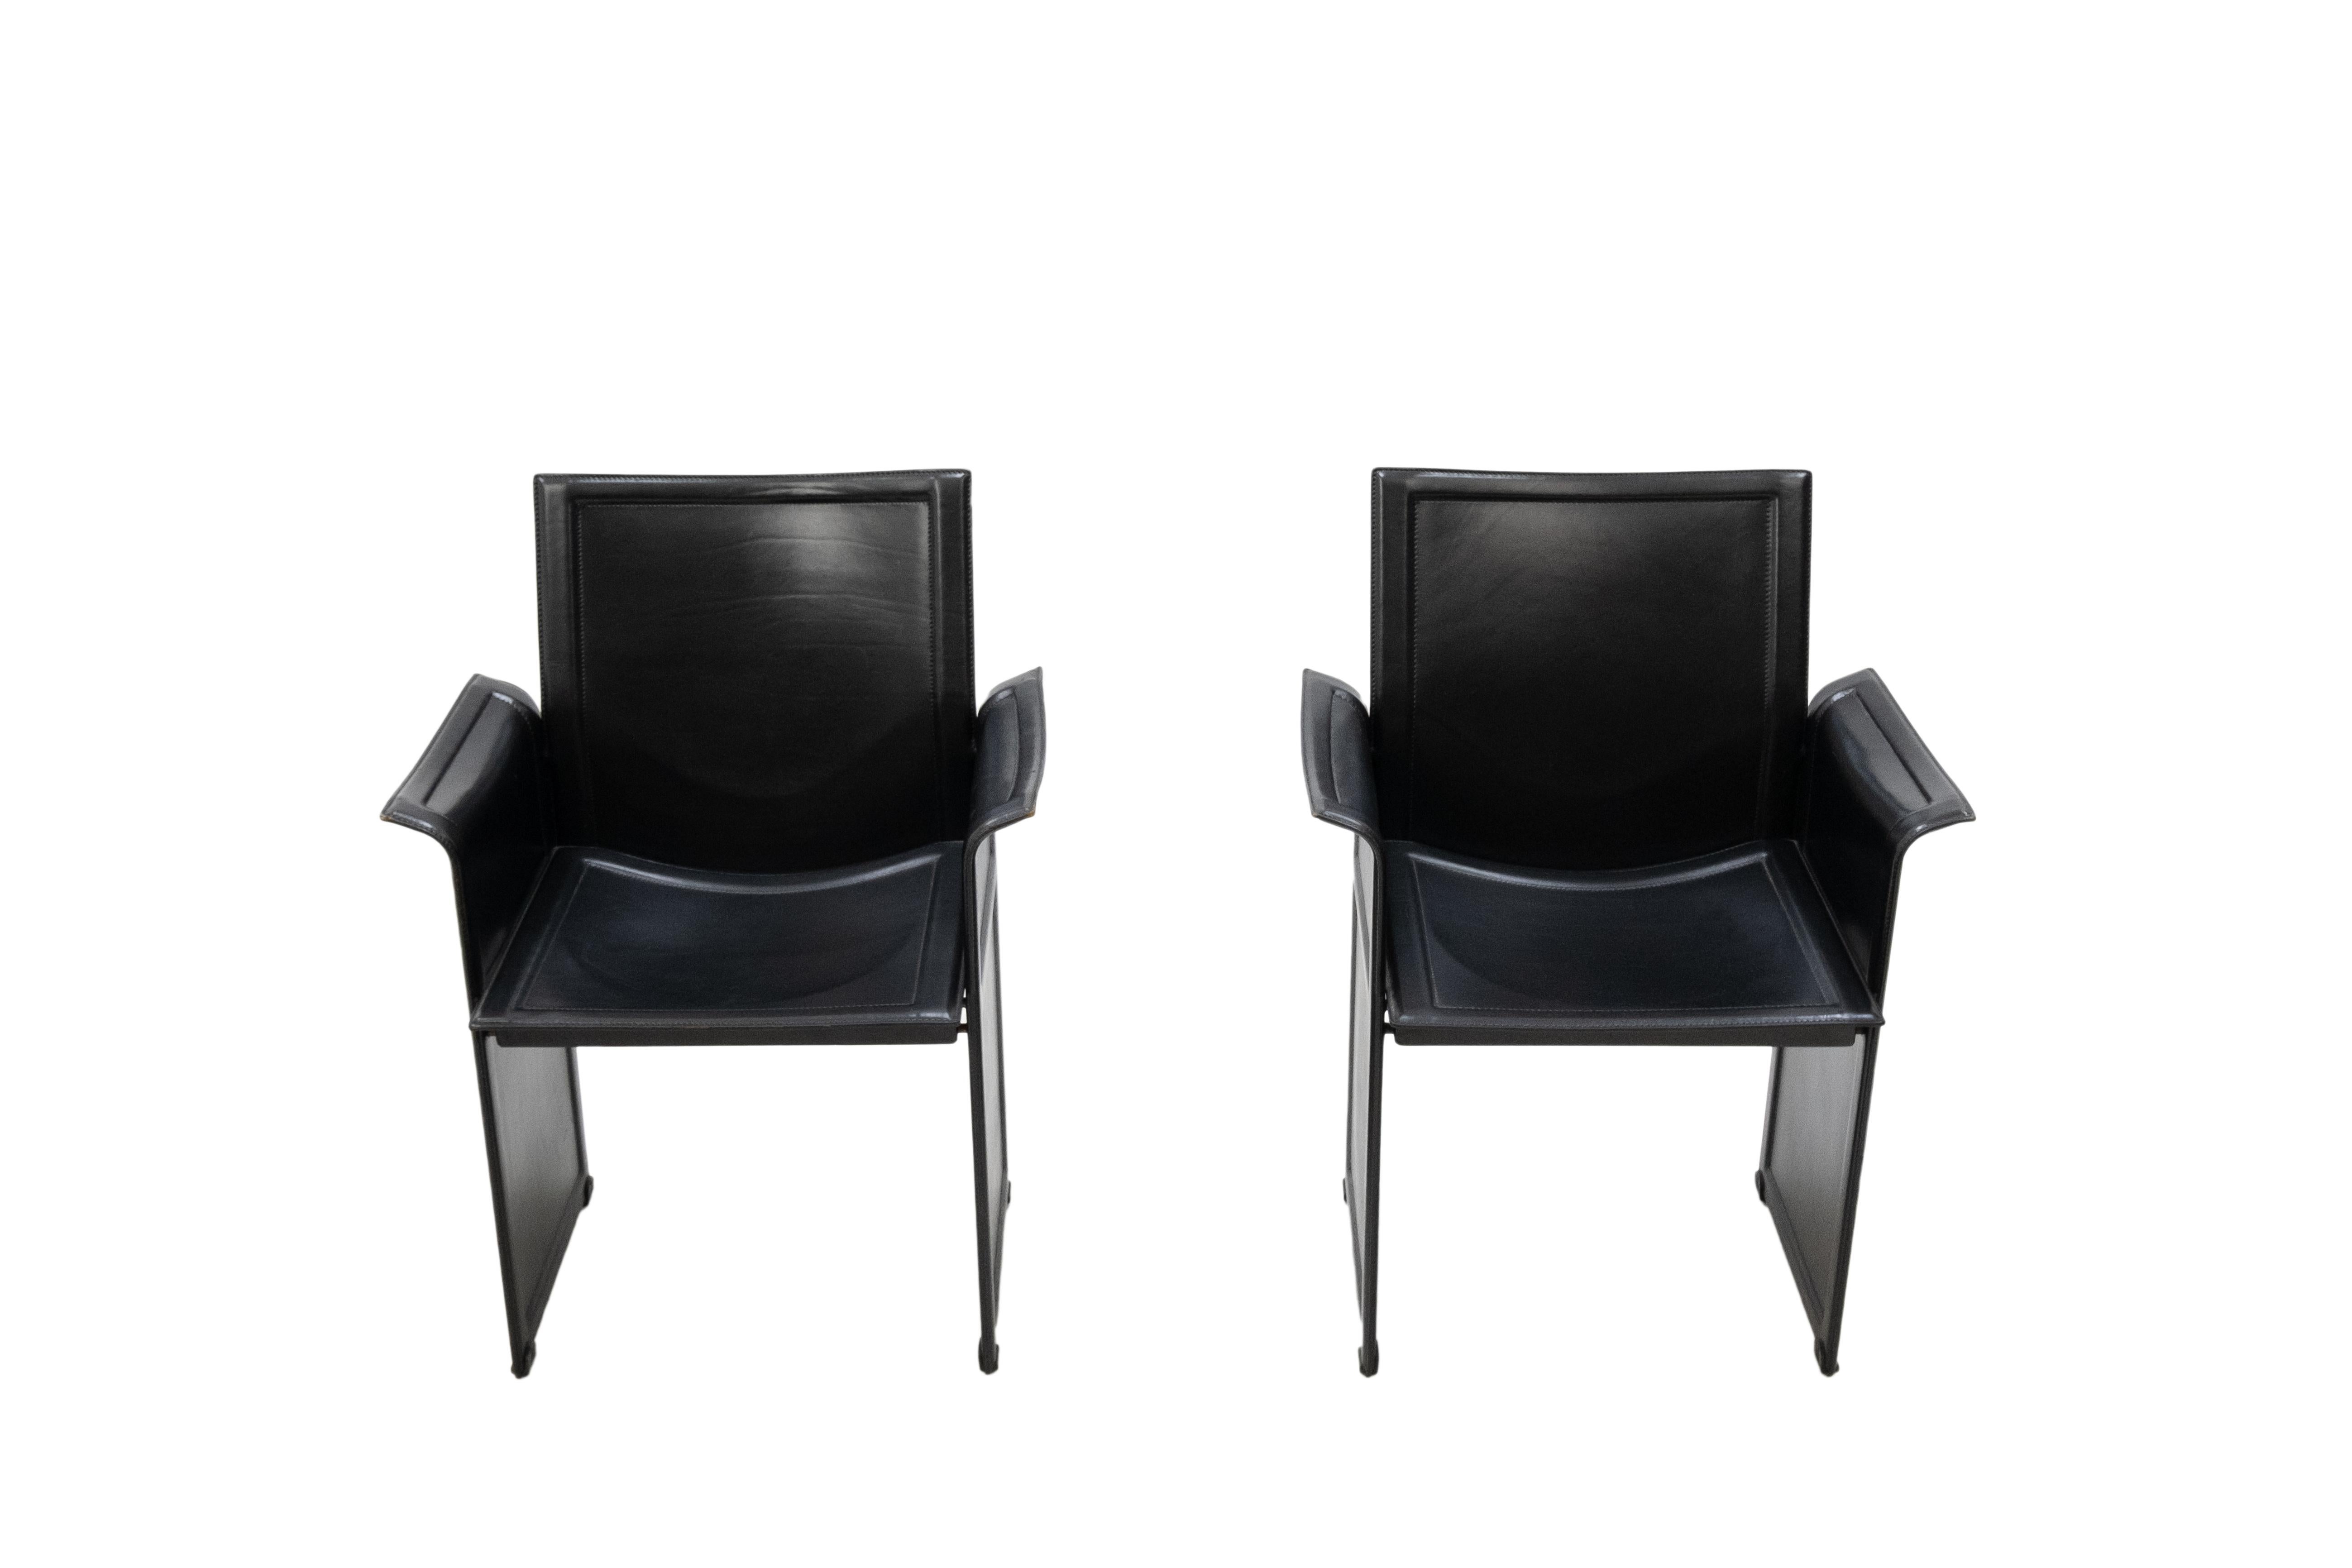 Tito Agnoli for Matteo Grassi chairs. Model Korium. Love these chairs completely covert
with thick black leather. Such a good Design Signed. Good condition.